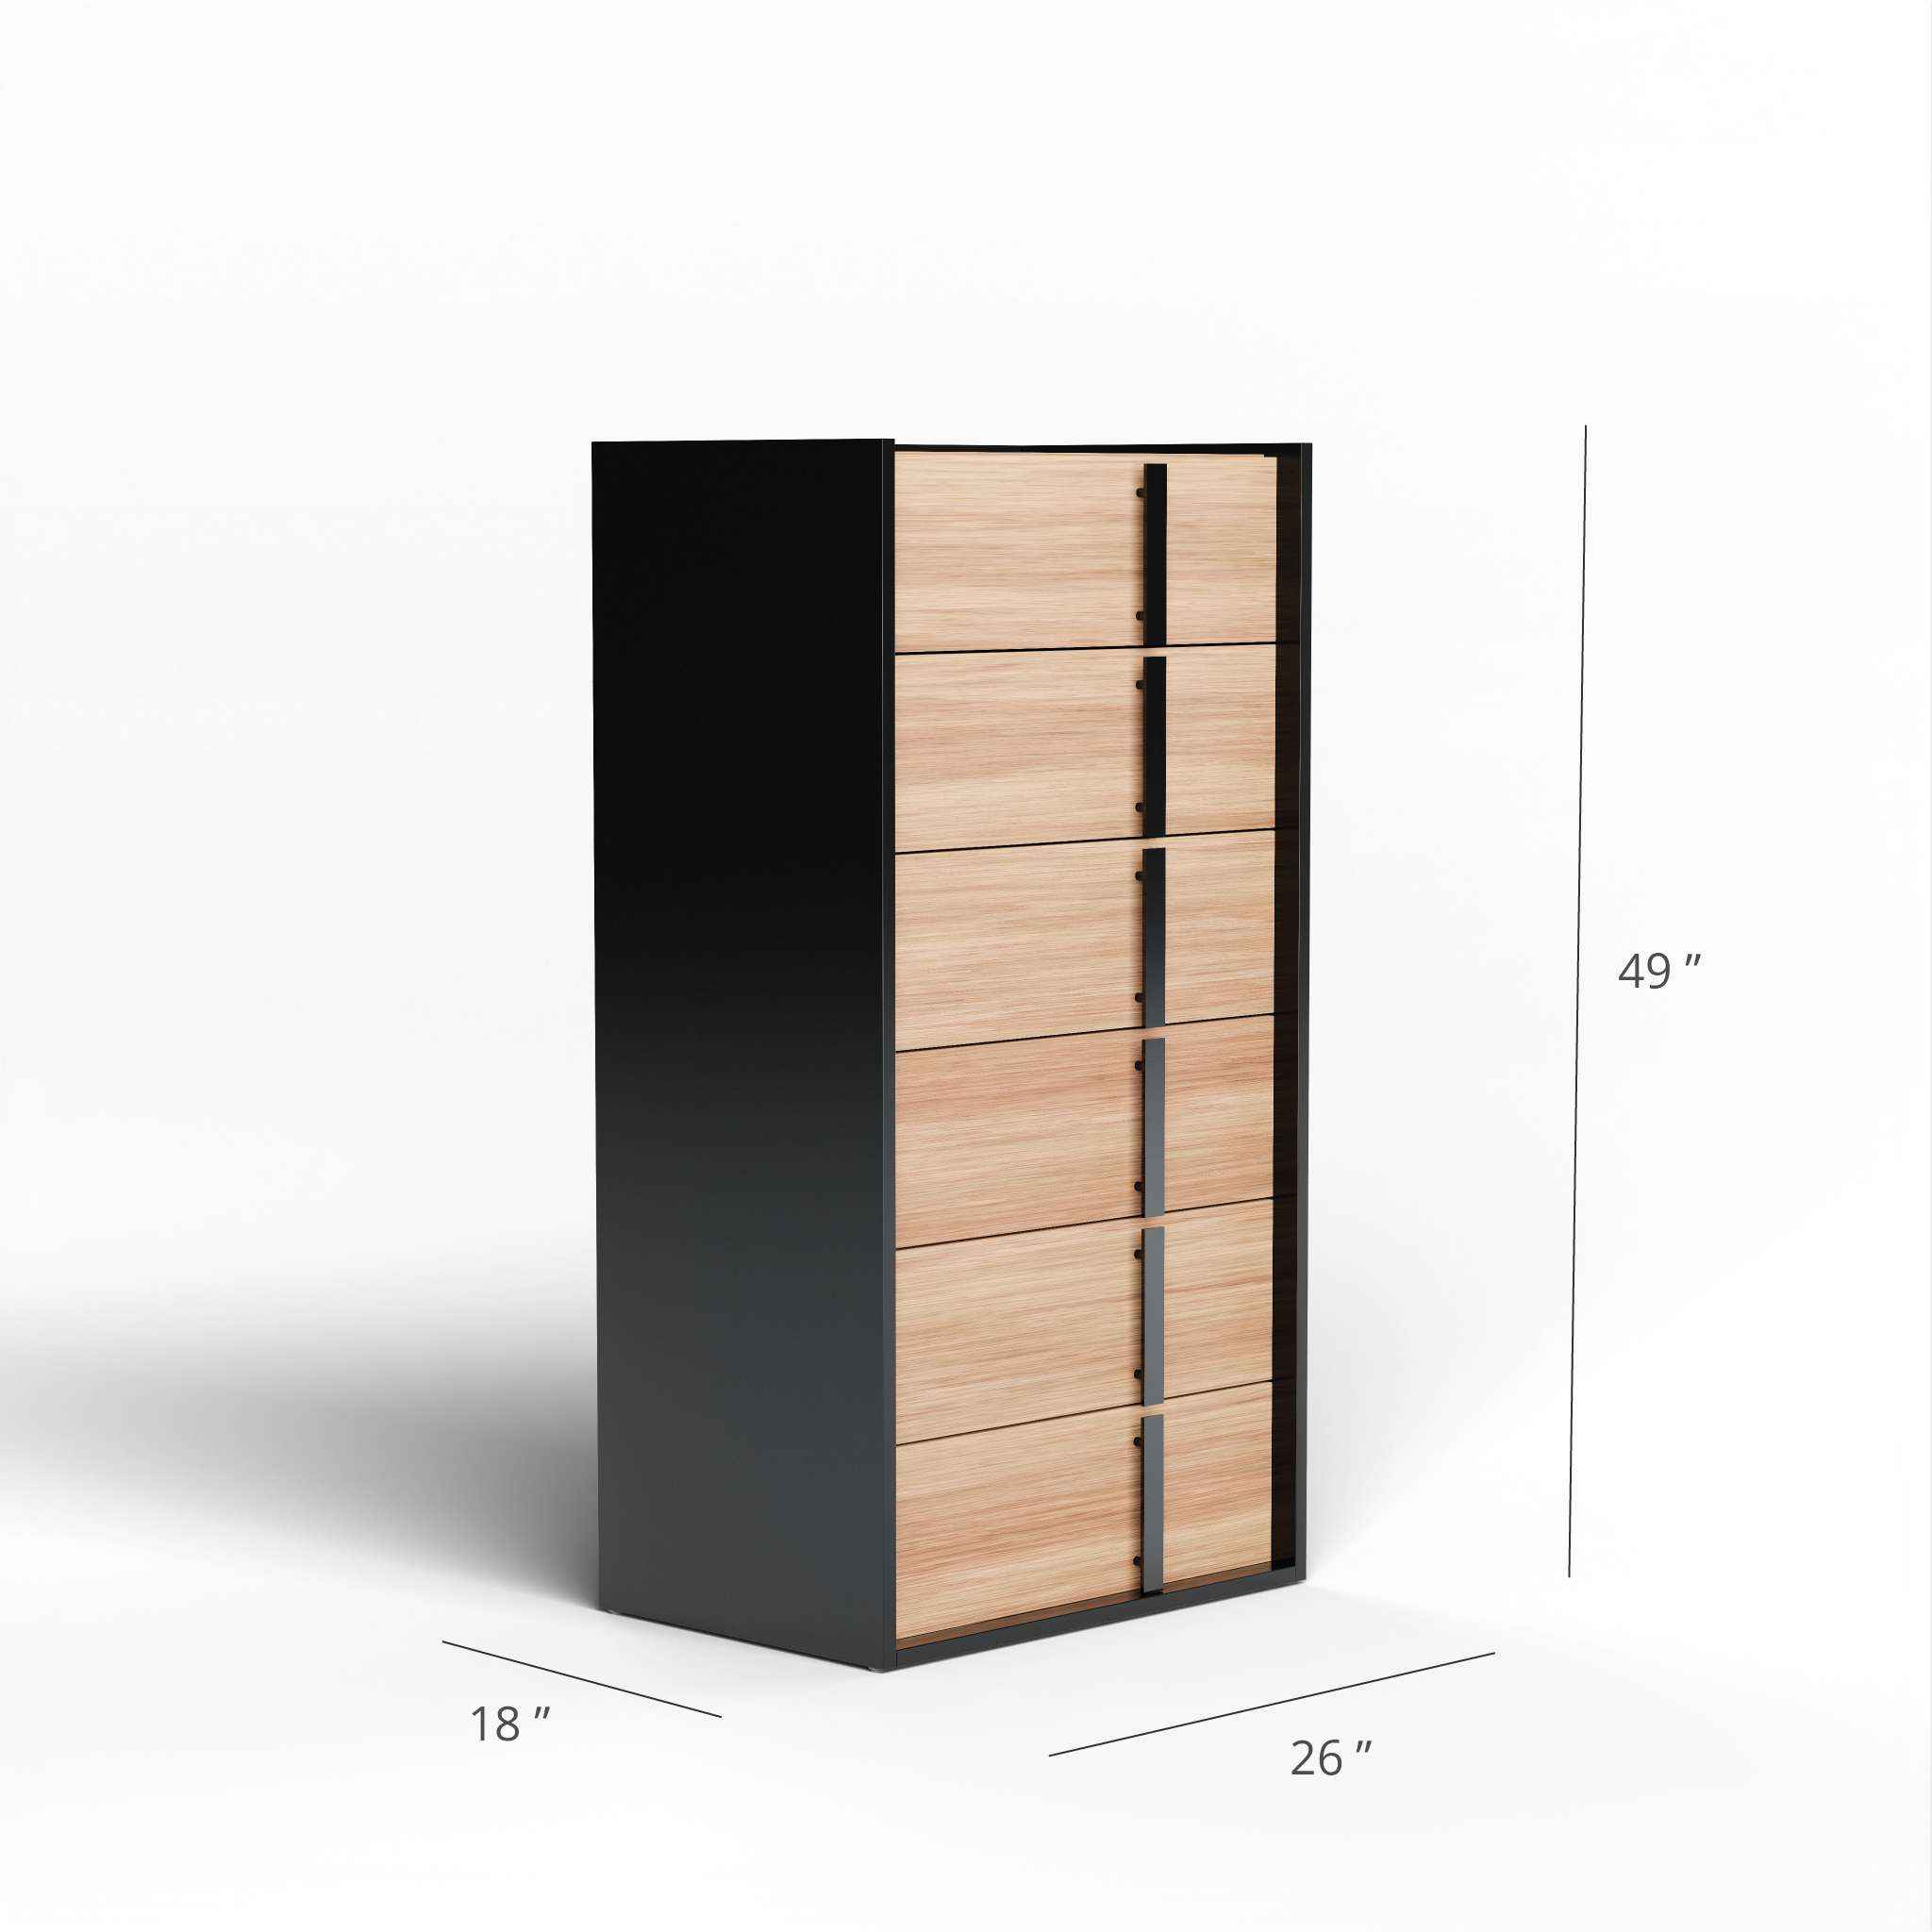 Kiyomi Andrea Chest of Drawers